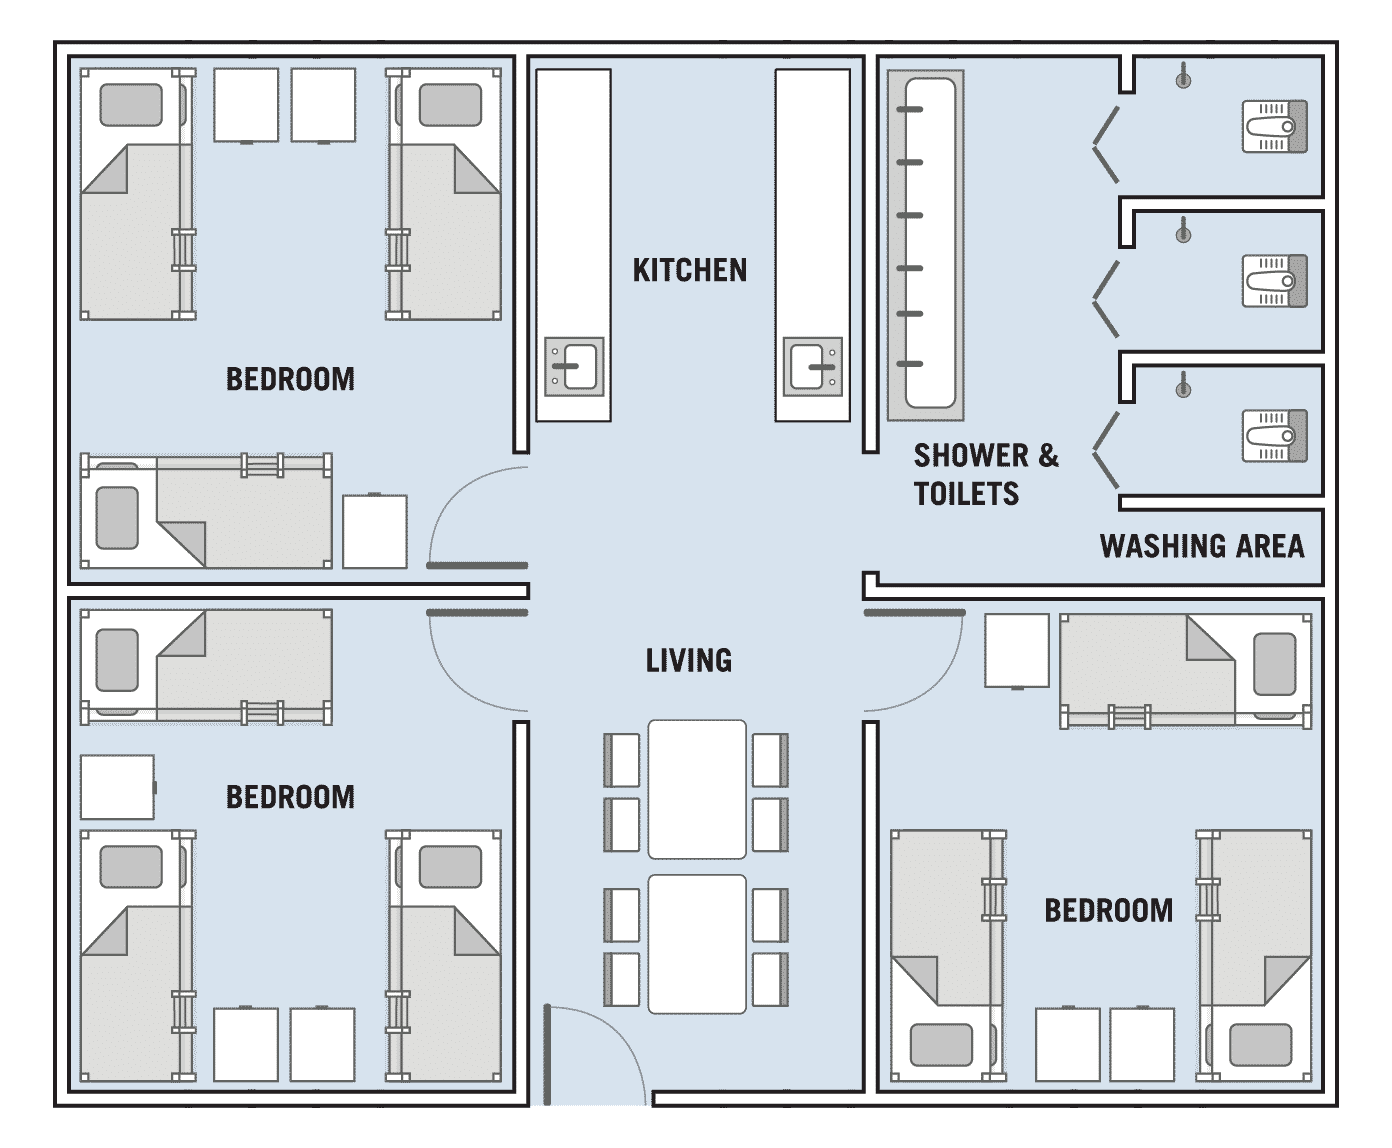 Floorplan of a typical apartment at Westlite Bukit Minyak<br><i>(Before reconfiguration to new JTKSM specifications)</i>